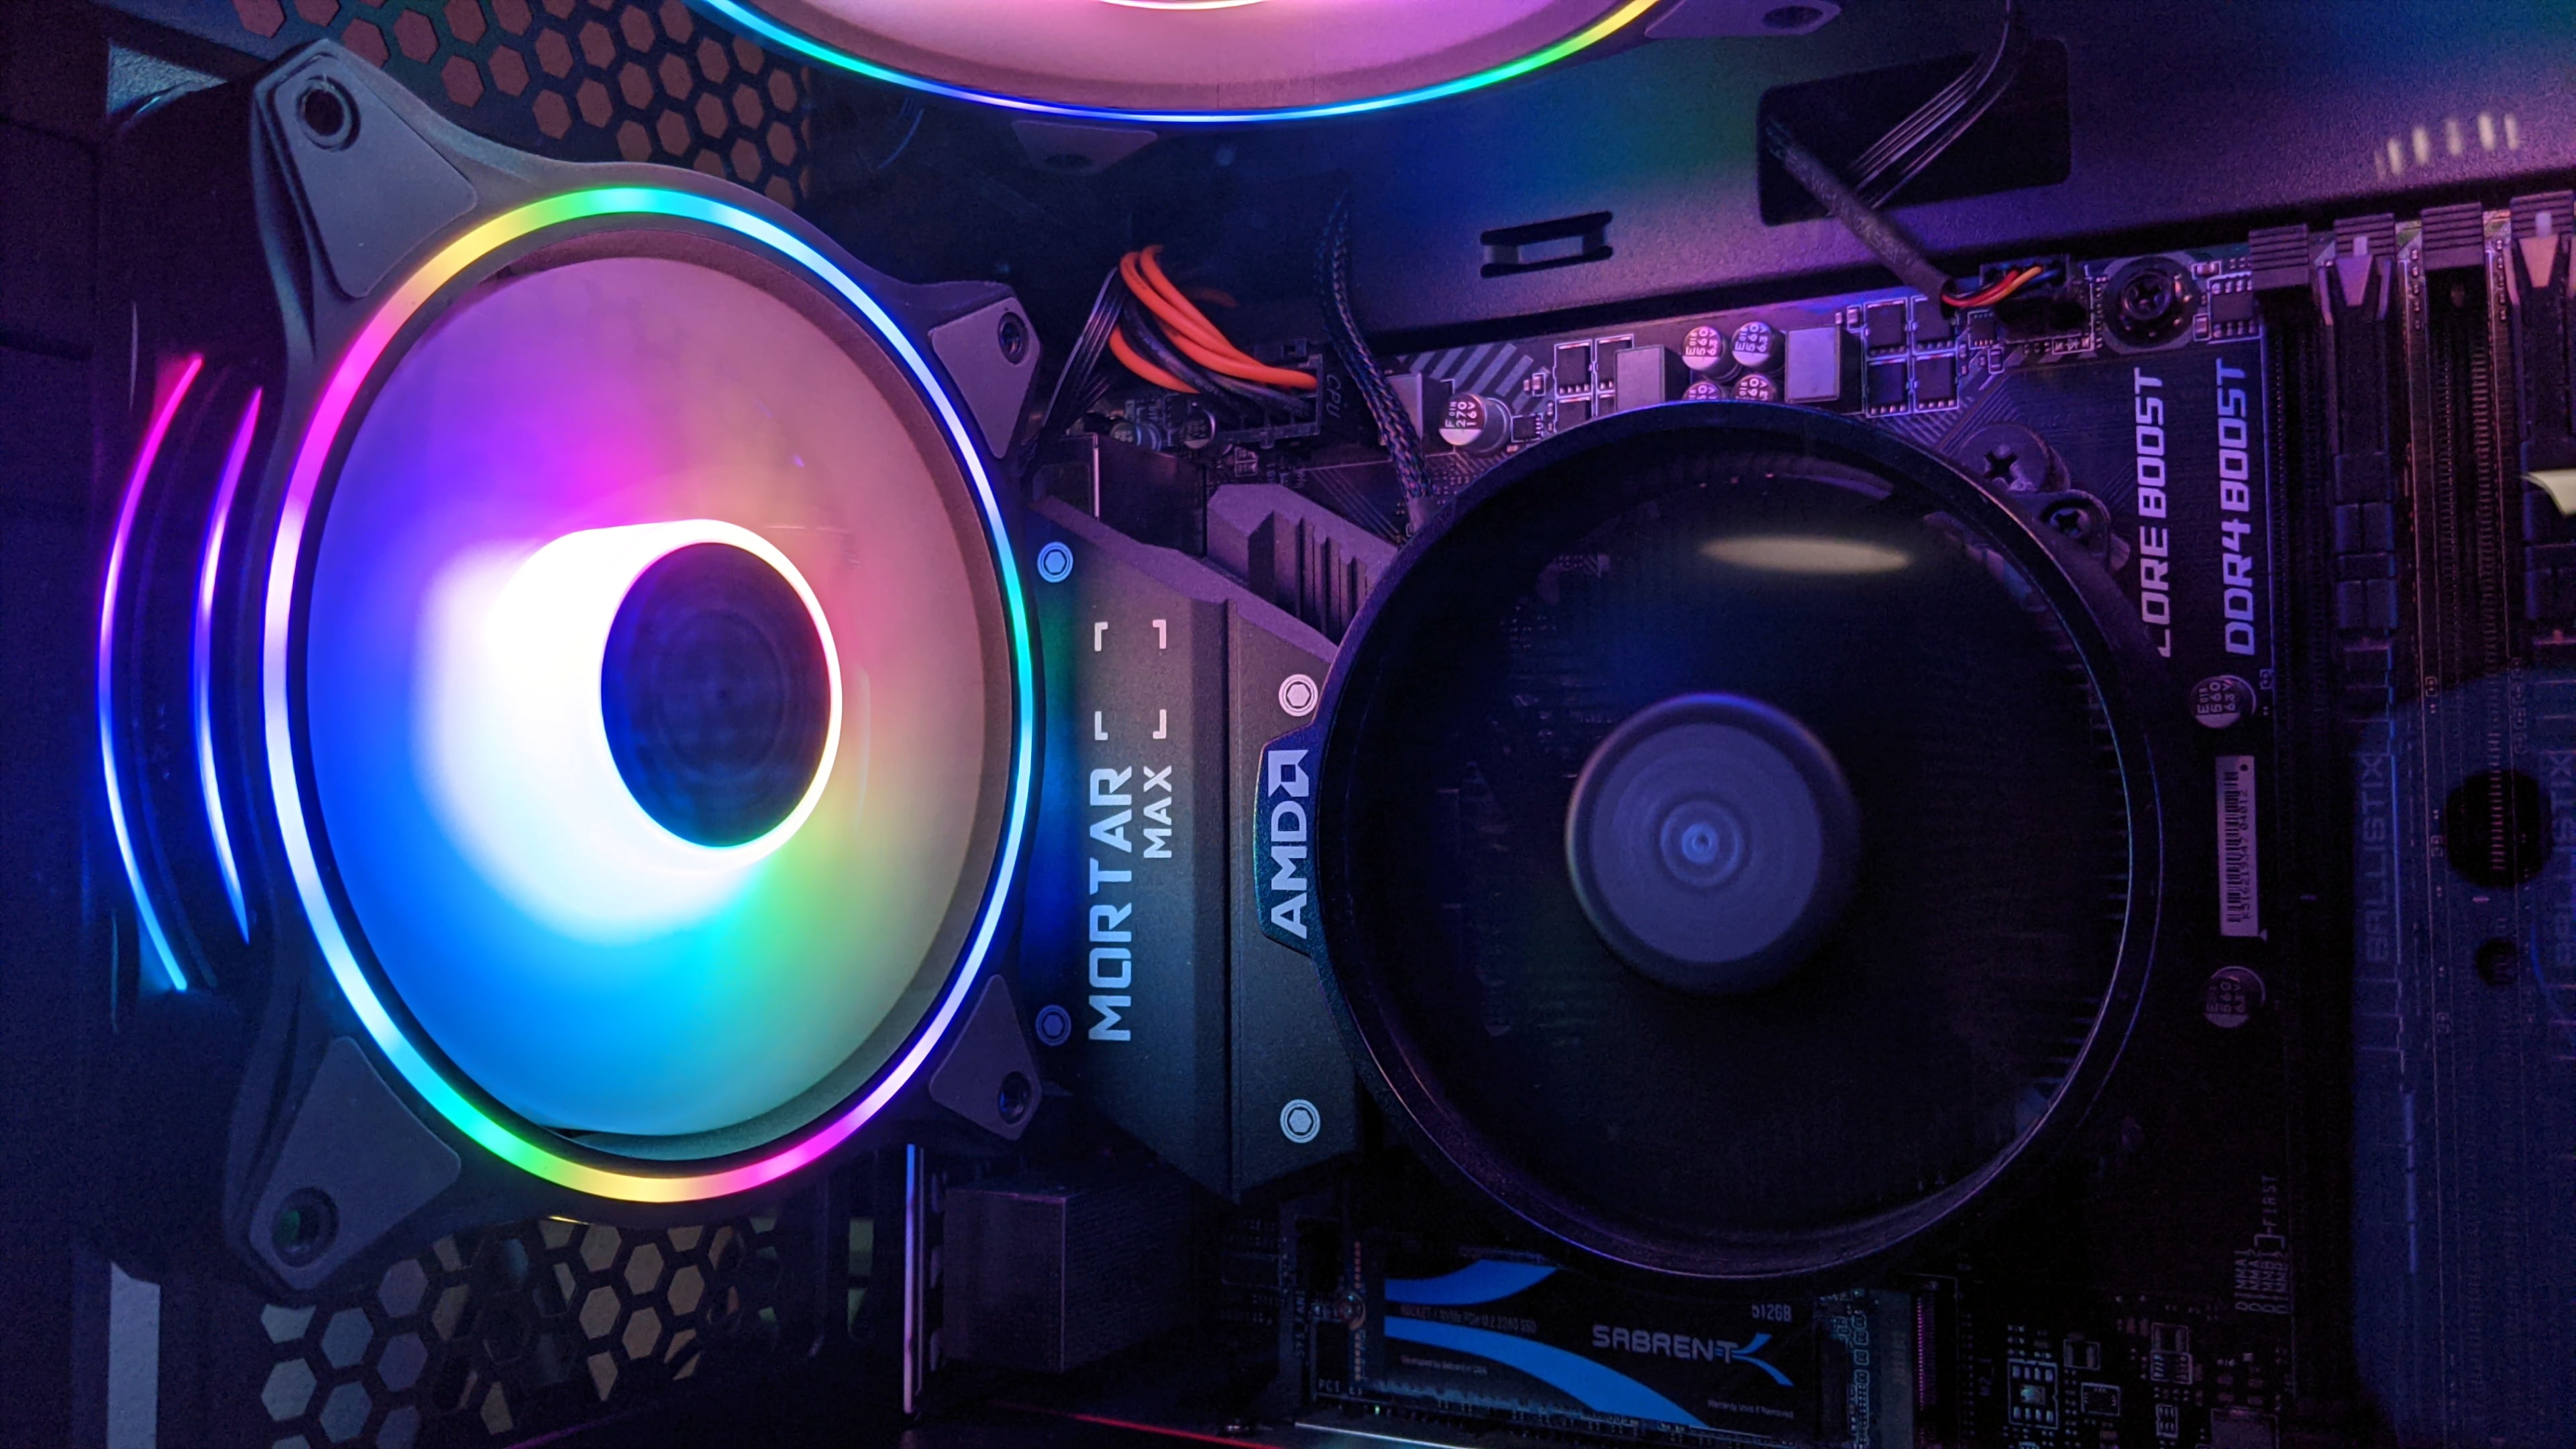 computer, AMD, MSI, colorful, technology